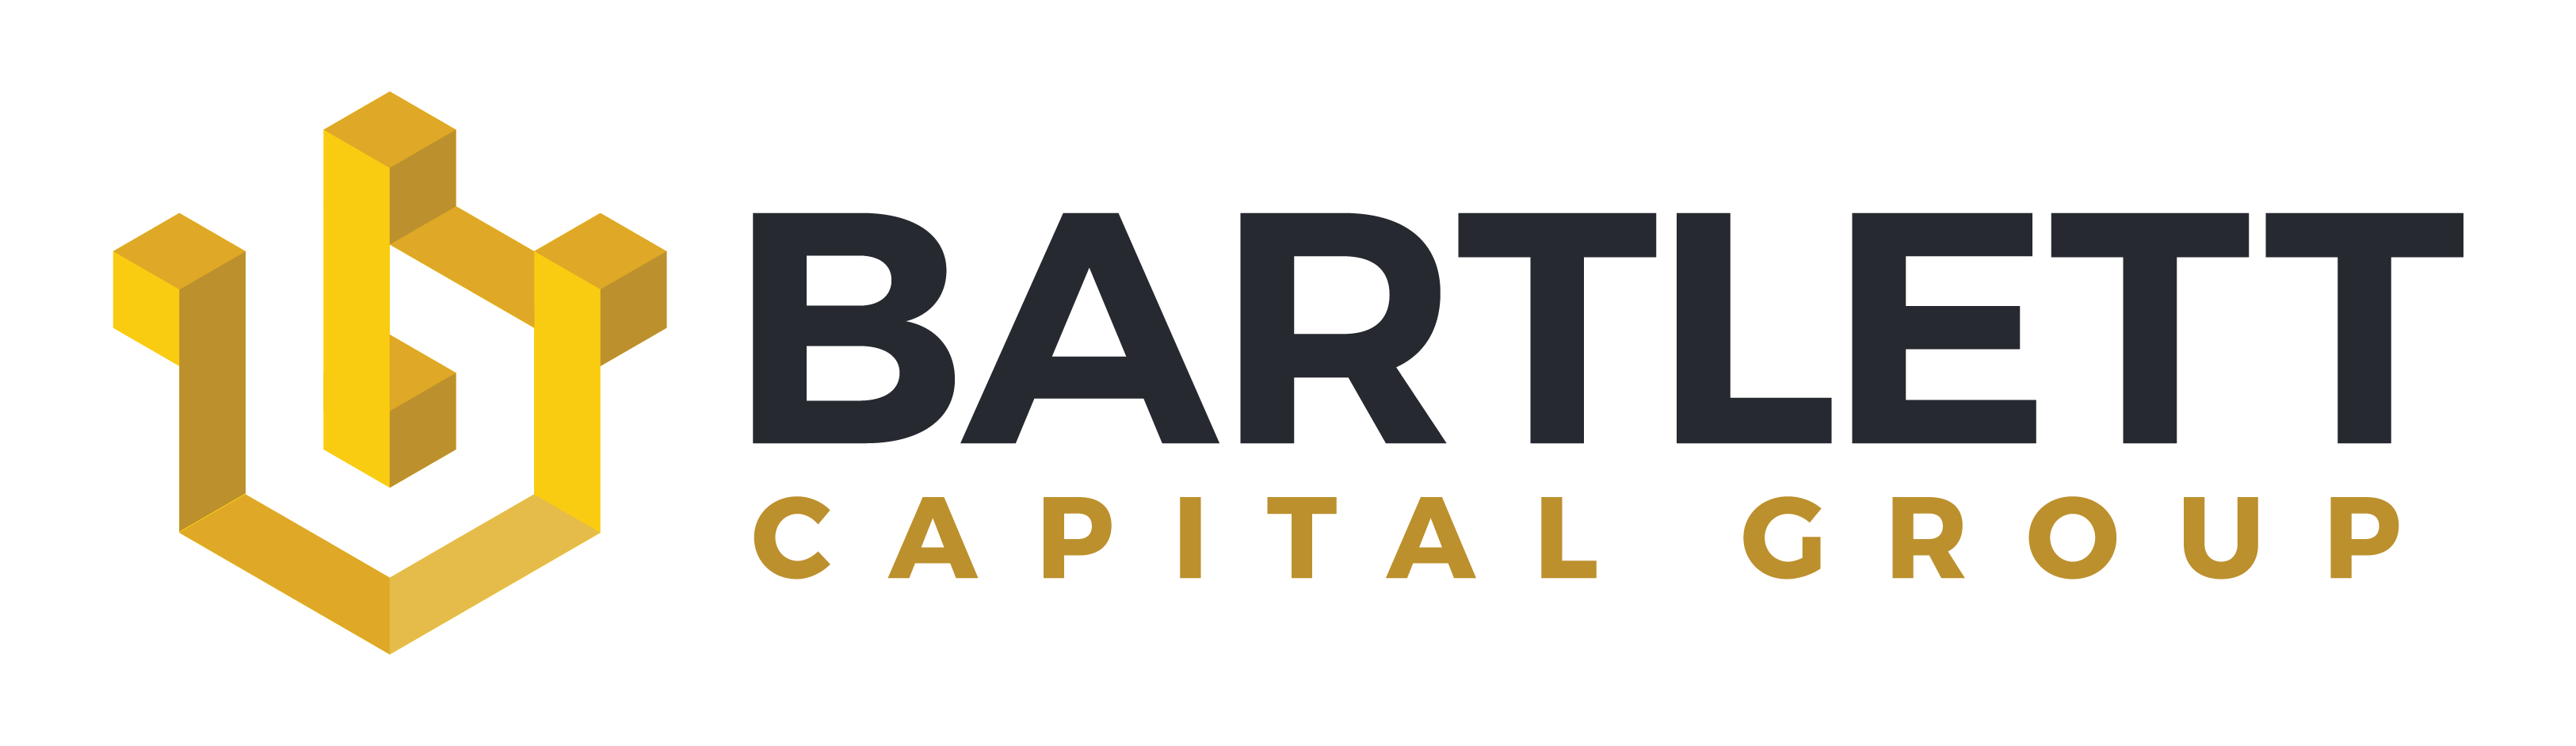 About Us Bartlett Capital Group